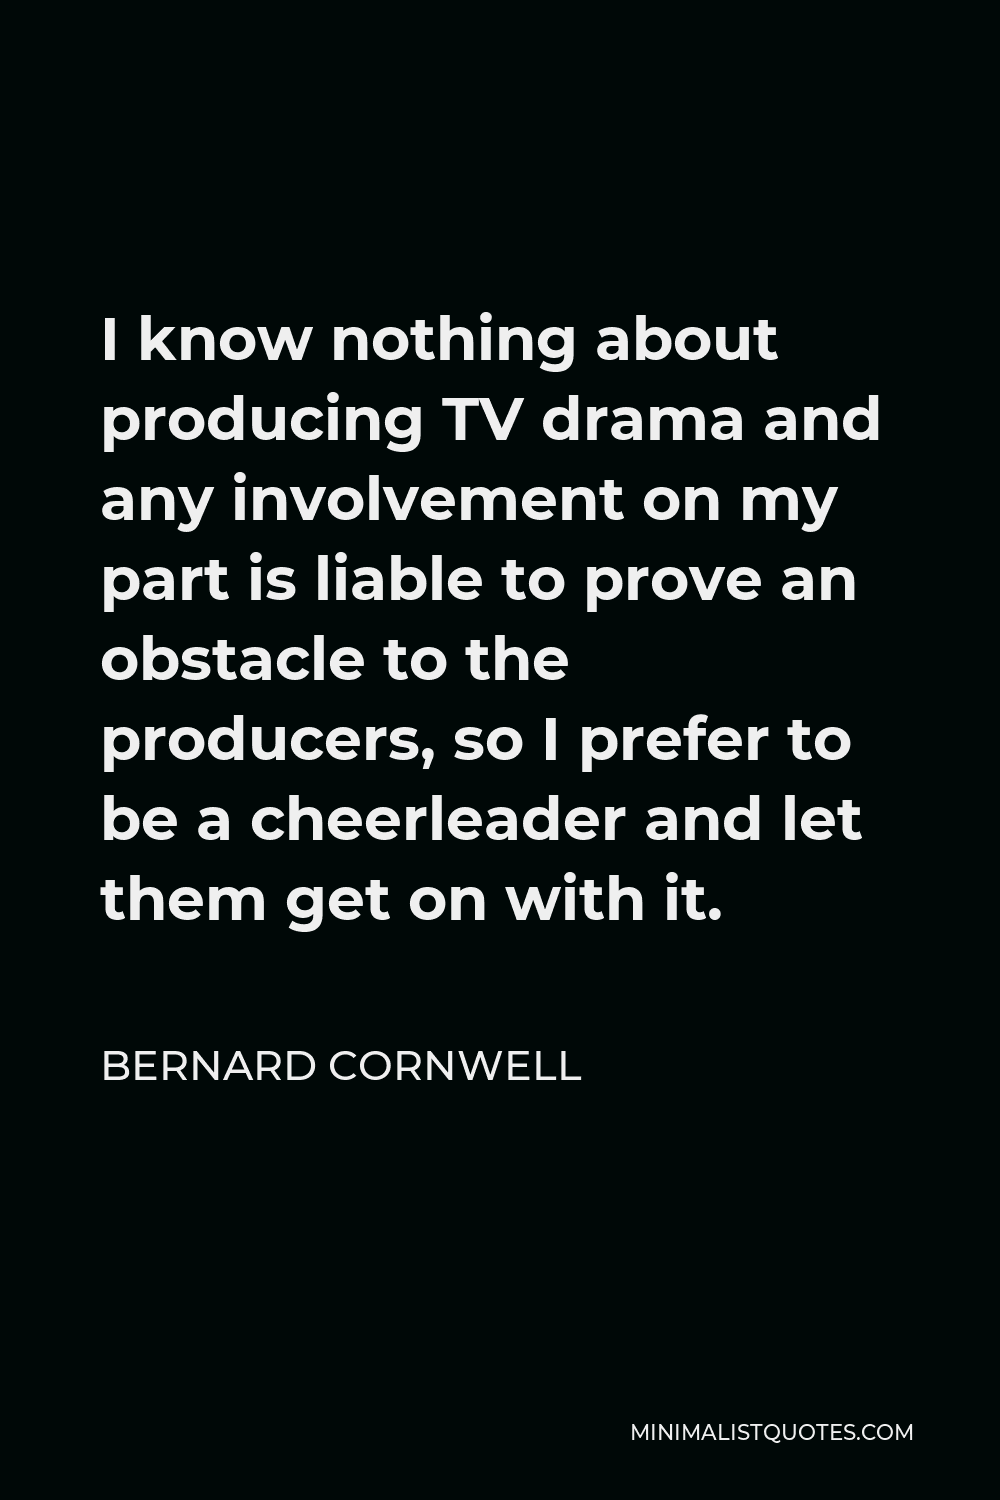 Bernard Cornwell Quote - I know nothing about producing TV drama and any involvement on my part is liable to prove an obstacle to the producers, so I prefer to be a cheerleader and let them get on with it.